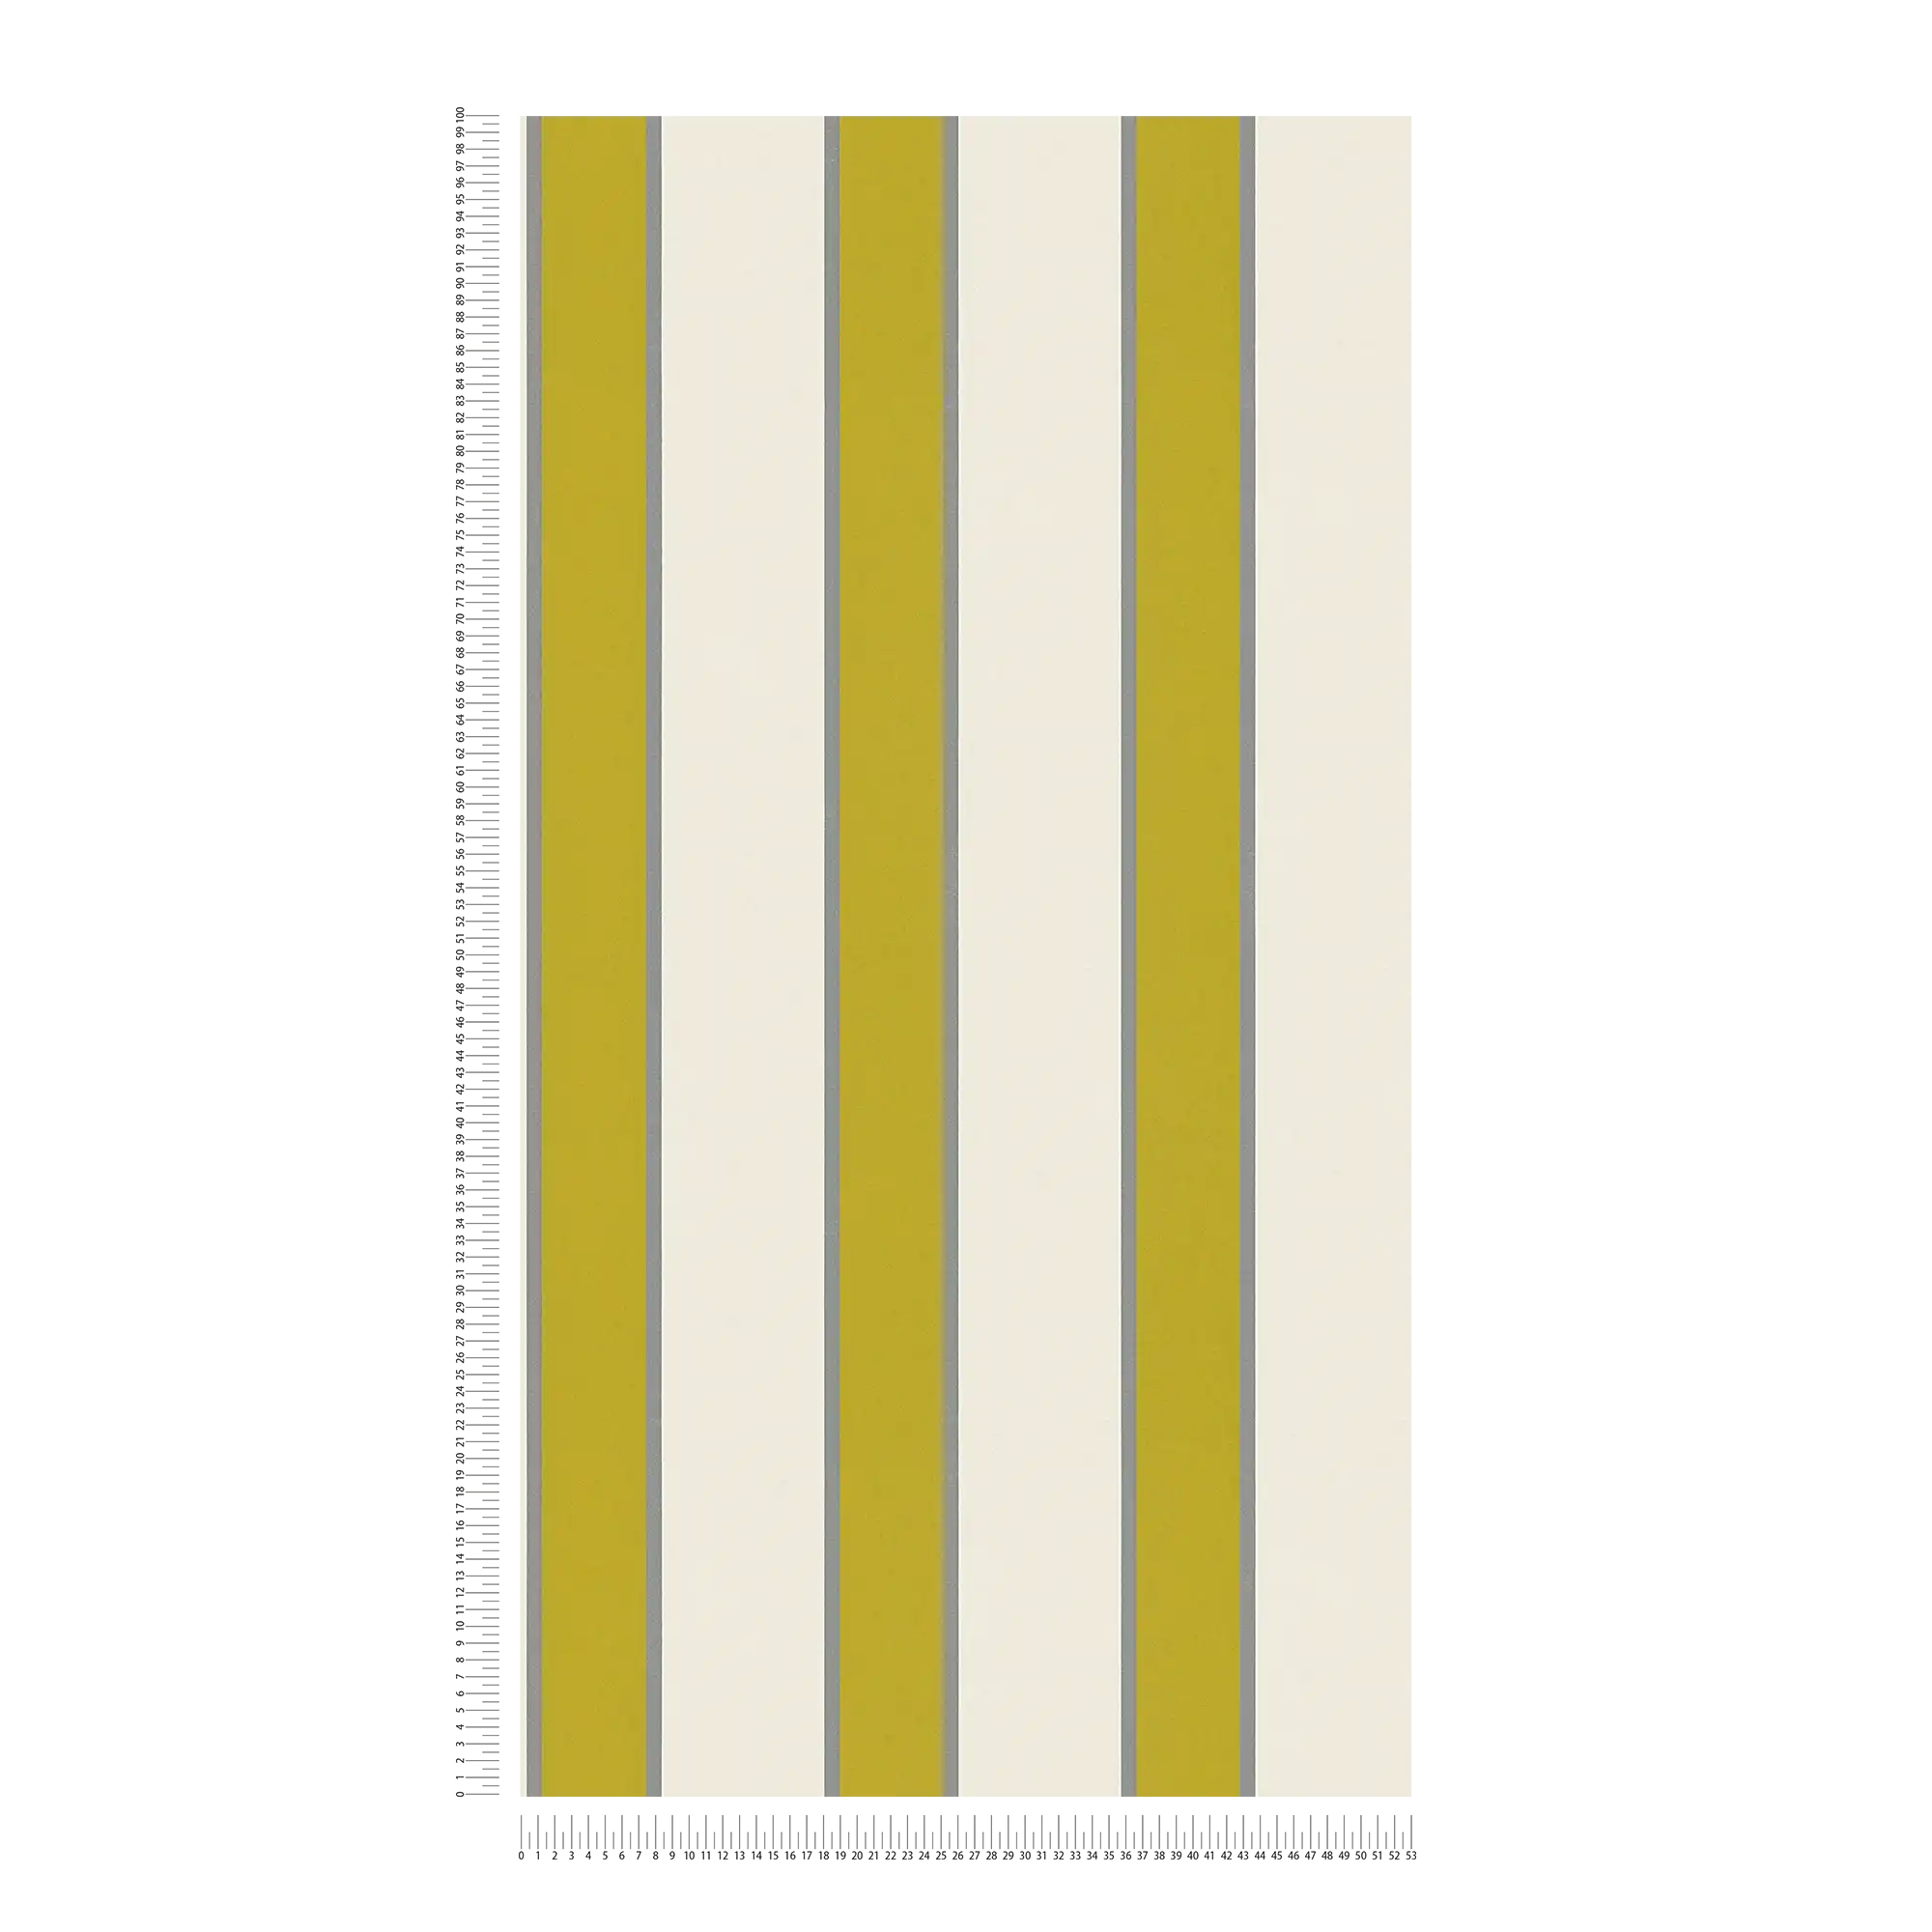             Striped wallpaper with metallic accents - beige, green
        